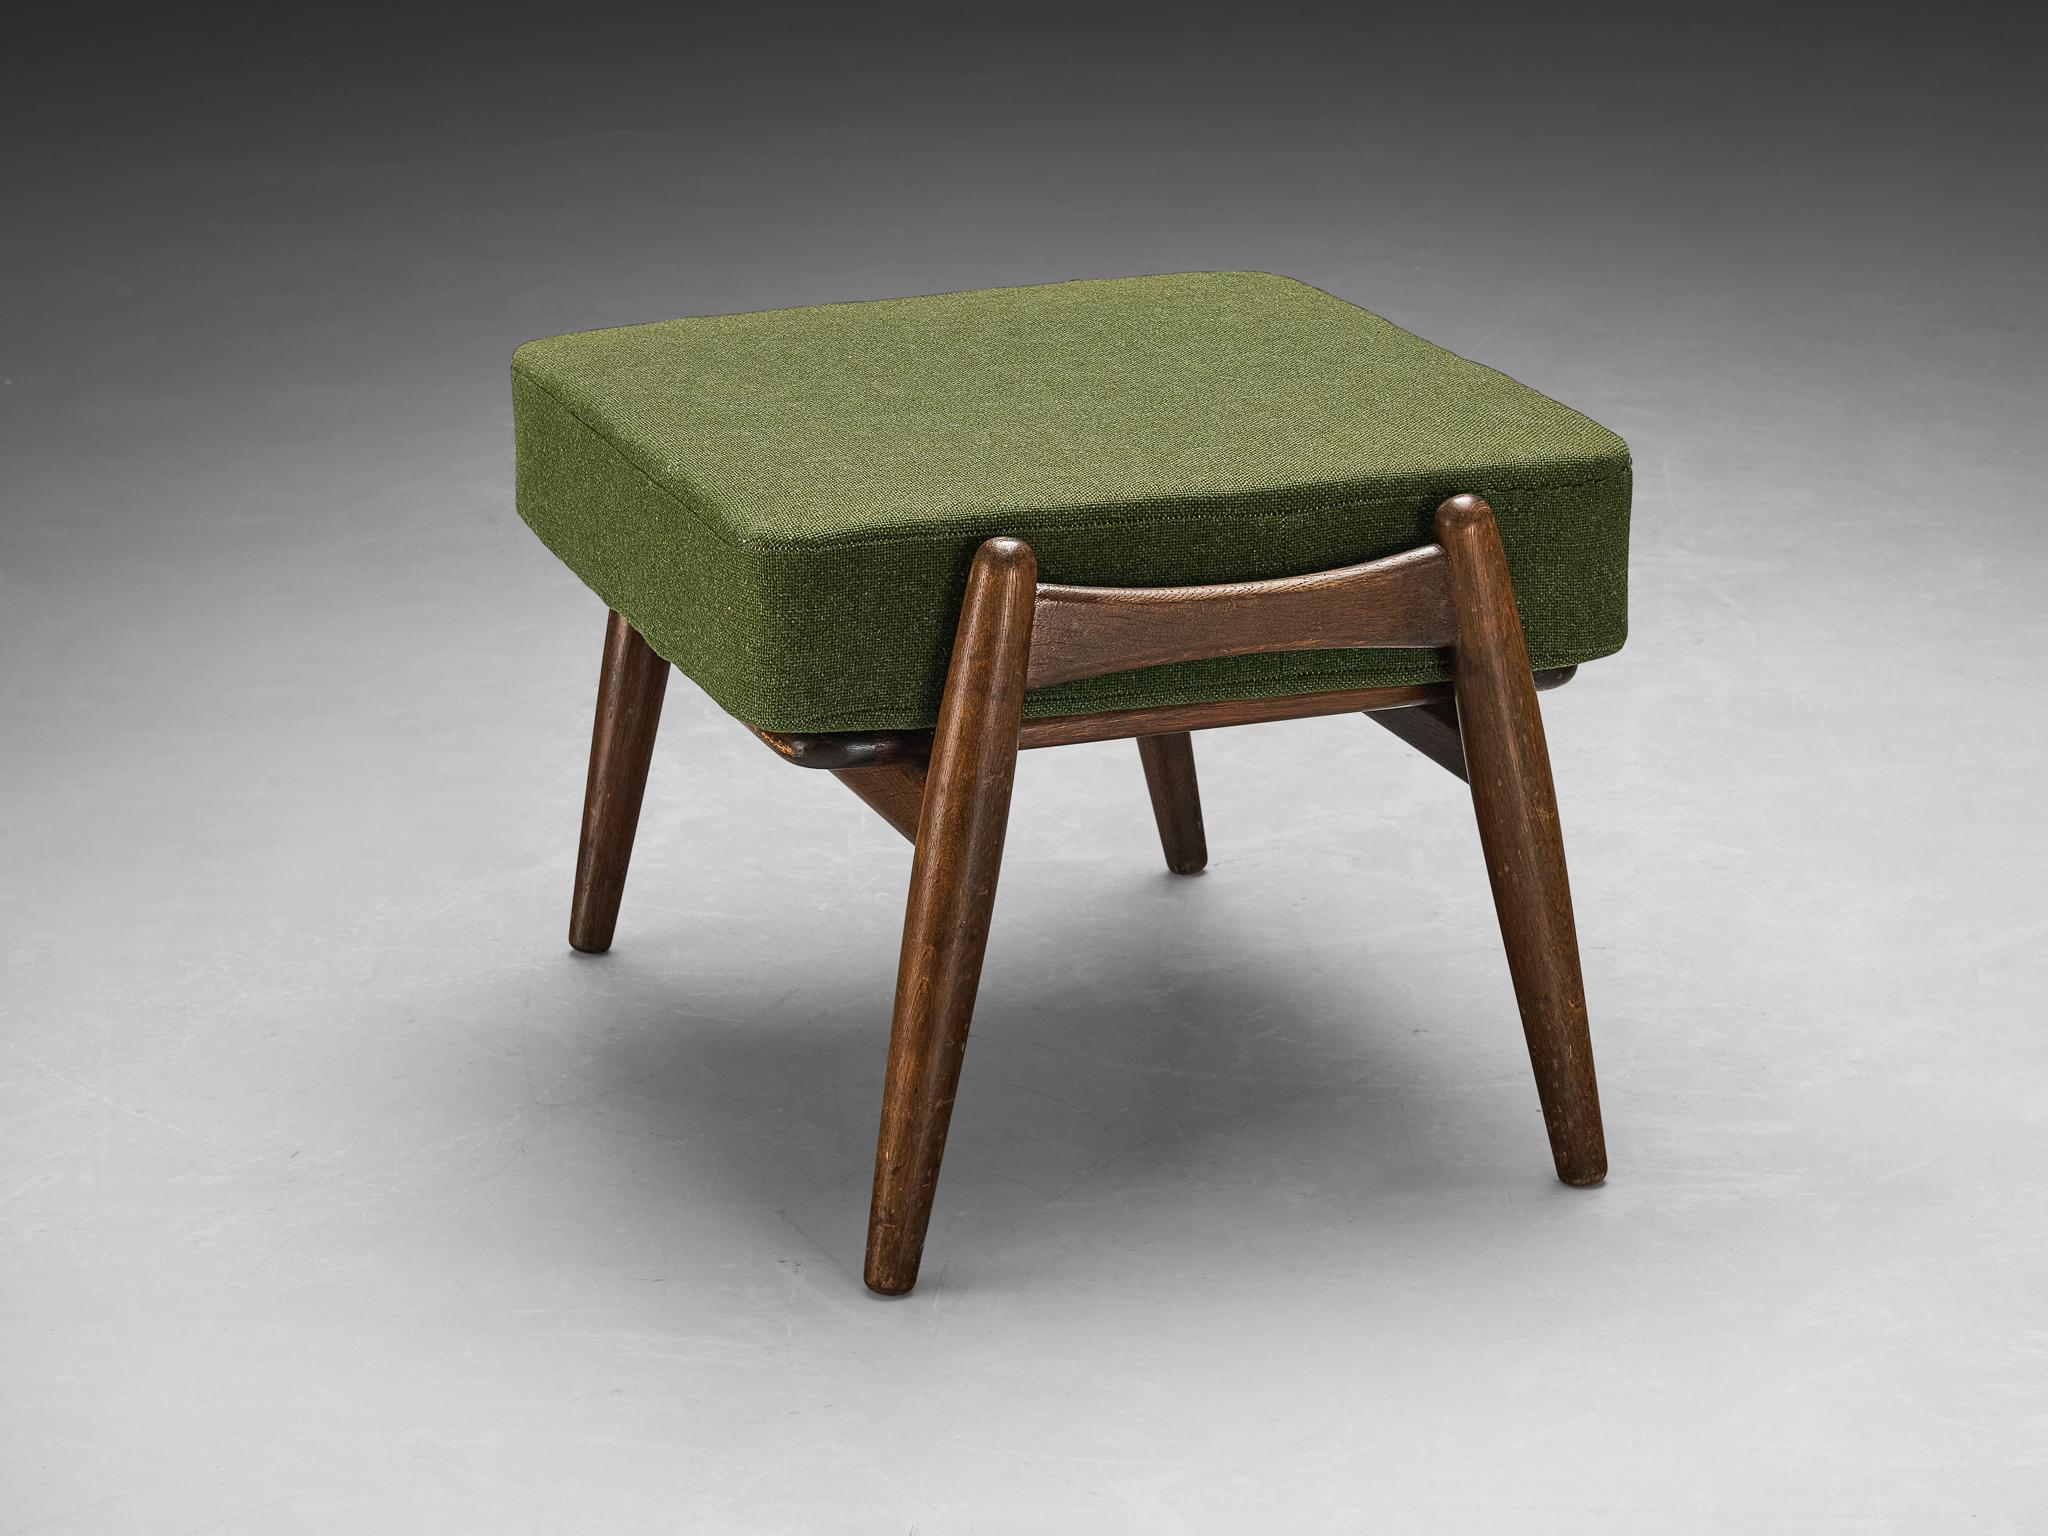 Mid-20th Century Hans J. Wegner for Getama 'Cigar' Stools in Solid Oak with Green Cushion  For Sale